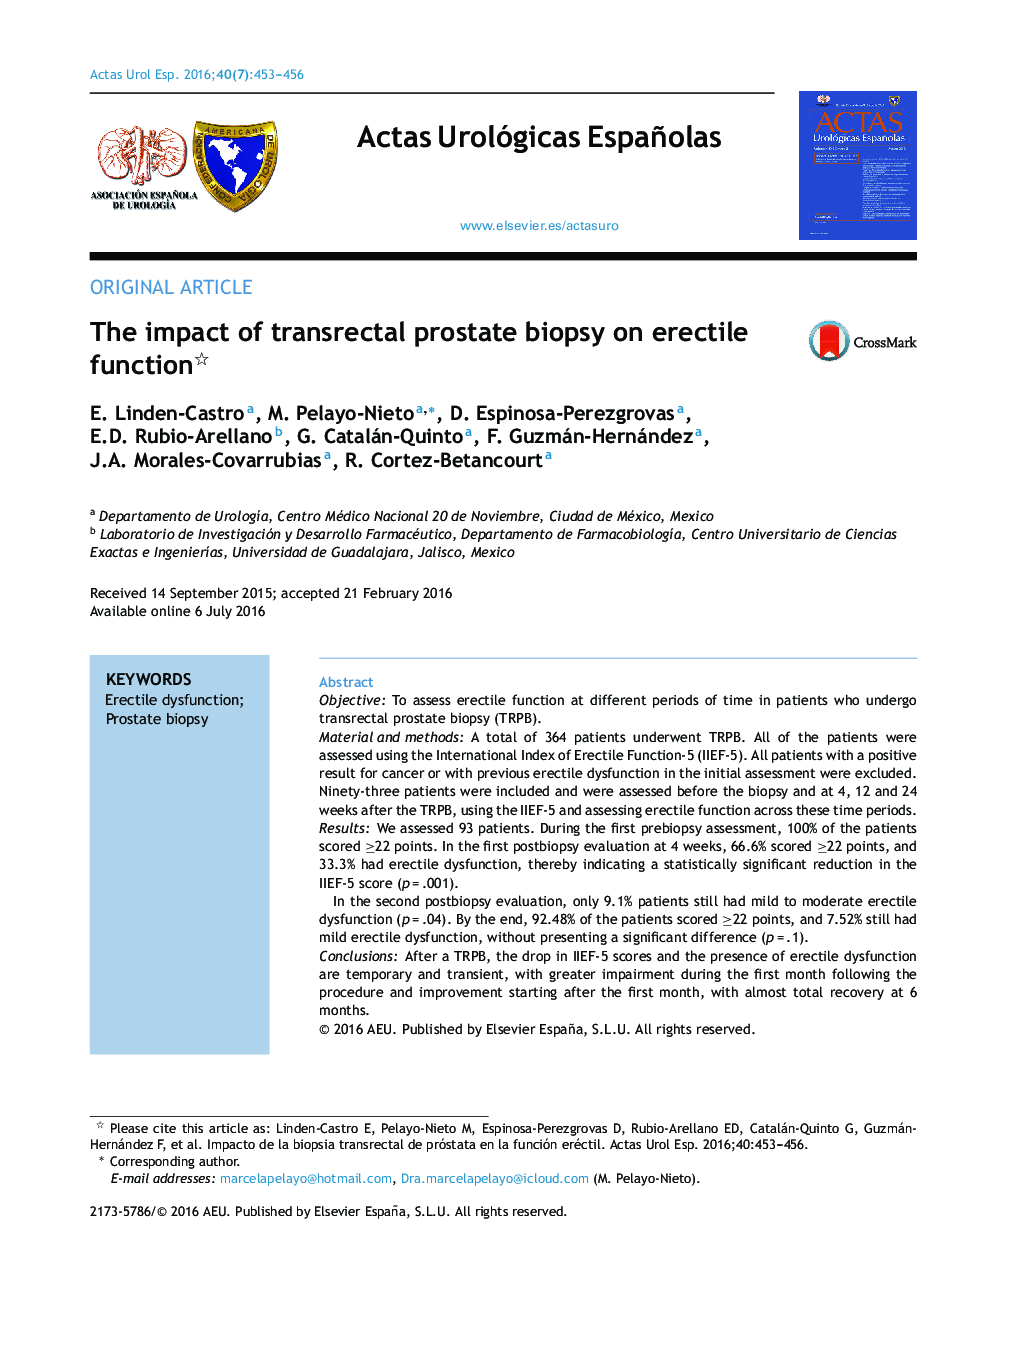 The impact of transrectal prostate biopsy on erectile function 